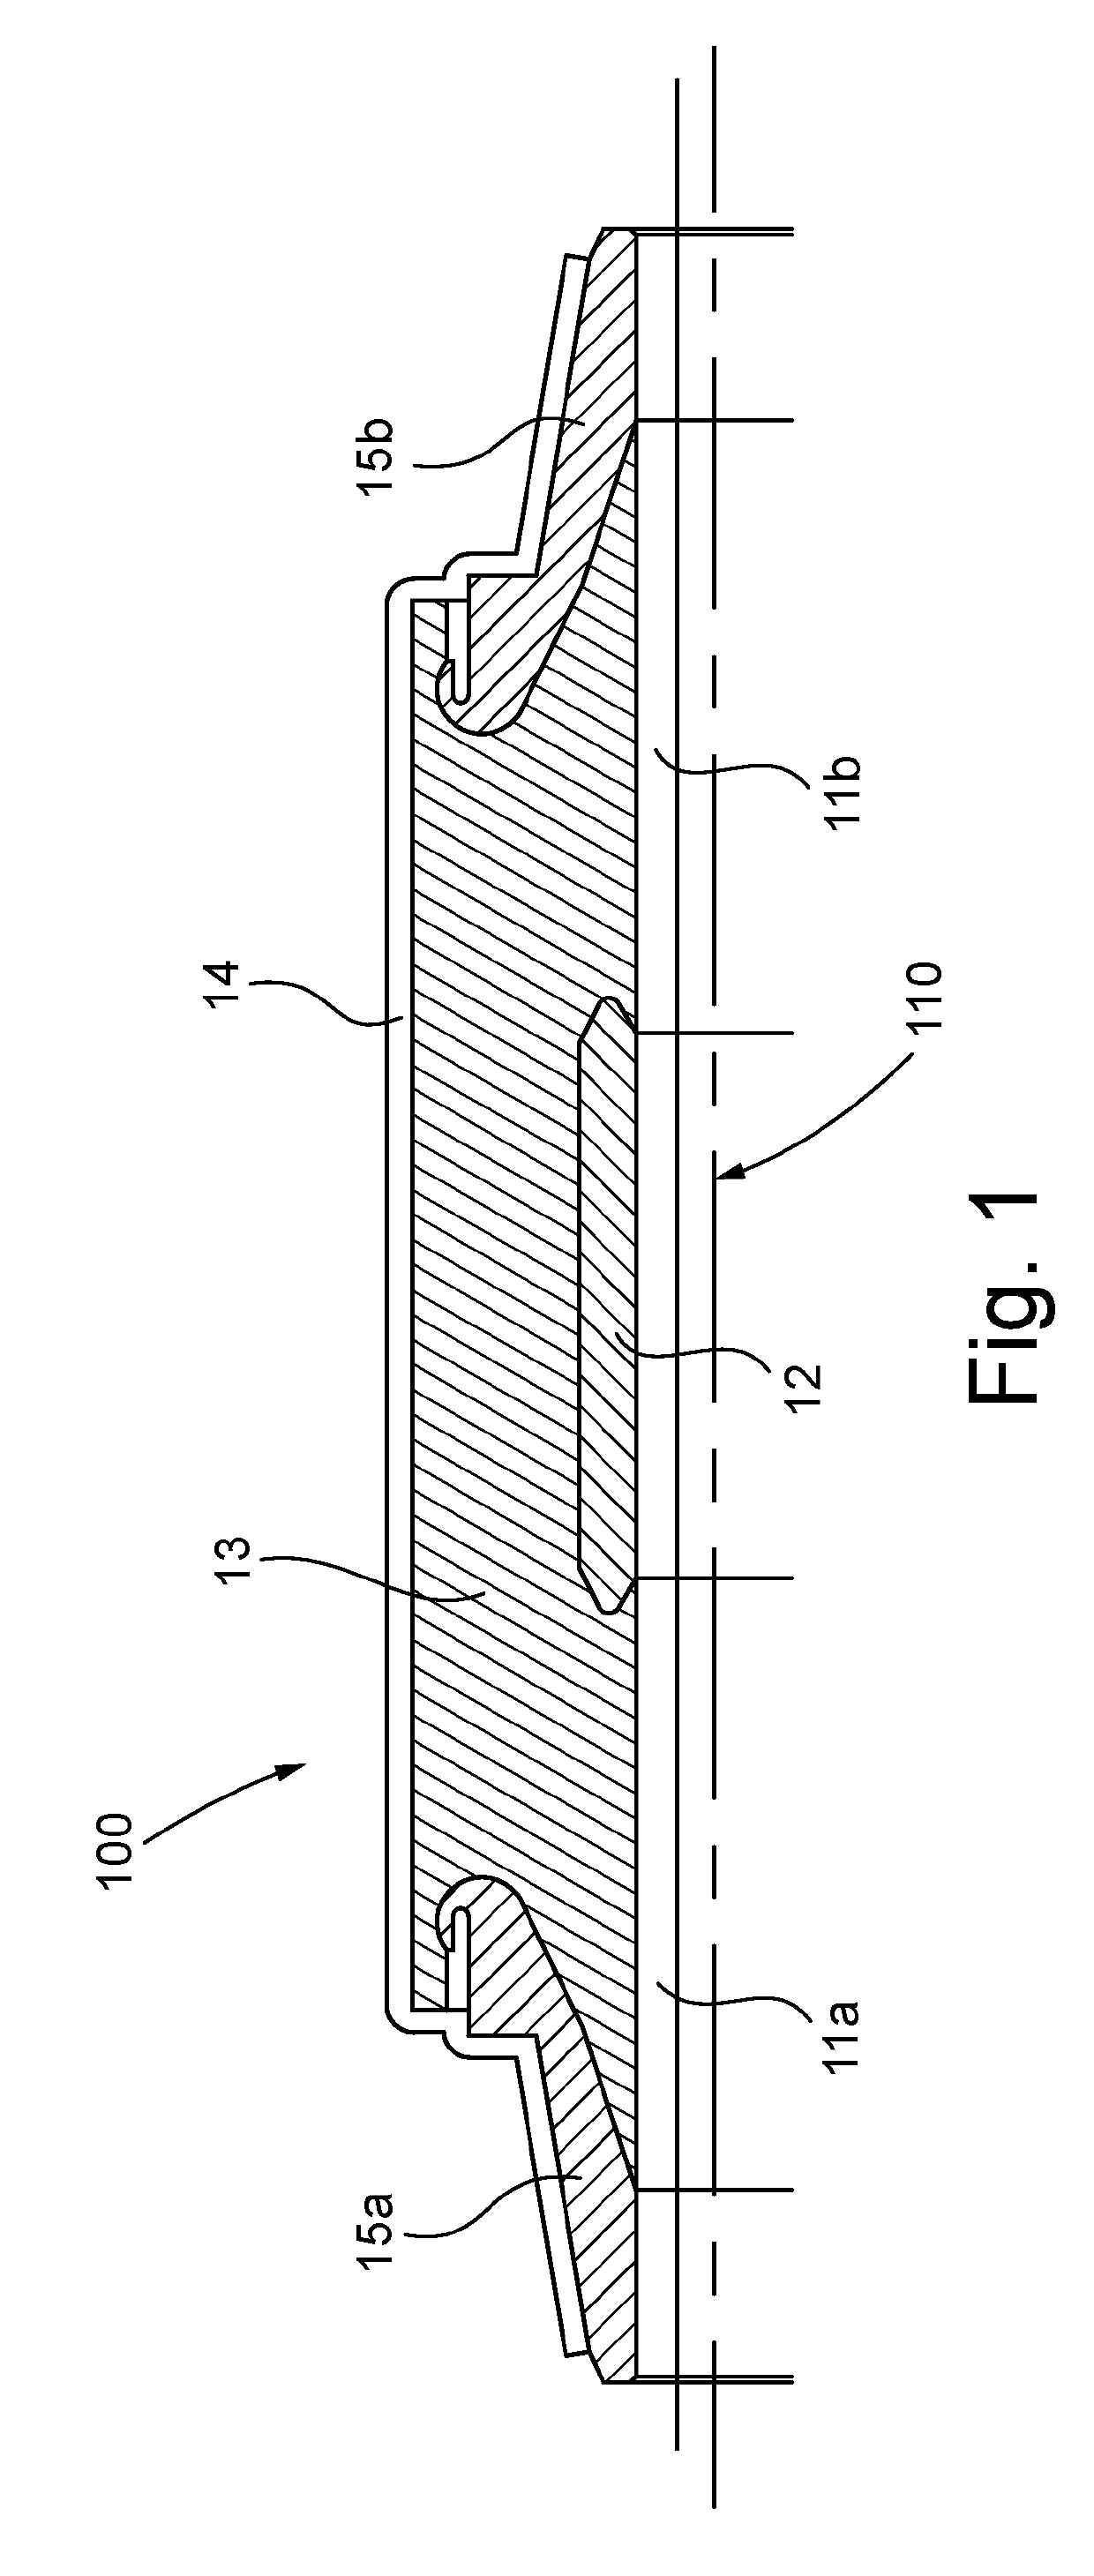 Electrical field grading material and use thereof in electrical cable accessories